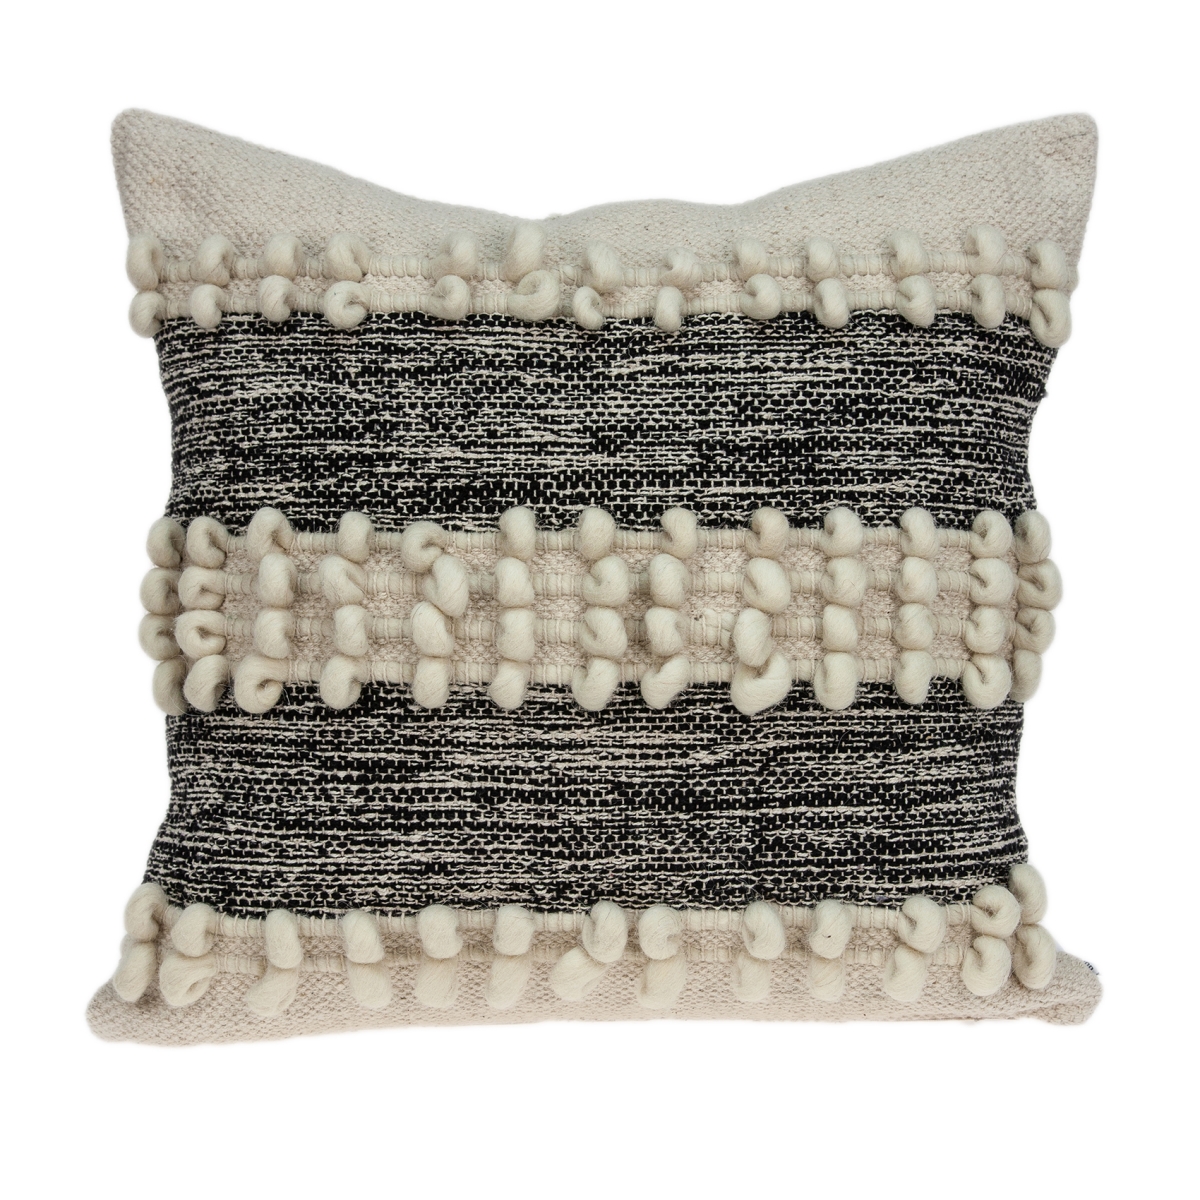 Pild11130p Harlow Beige & Black Square Bohemian Pillow Cover With Poly Insert - 20 X 20 X 7 In.